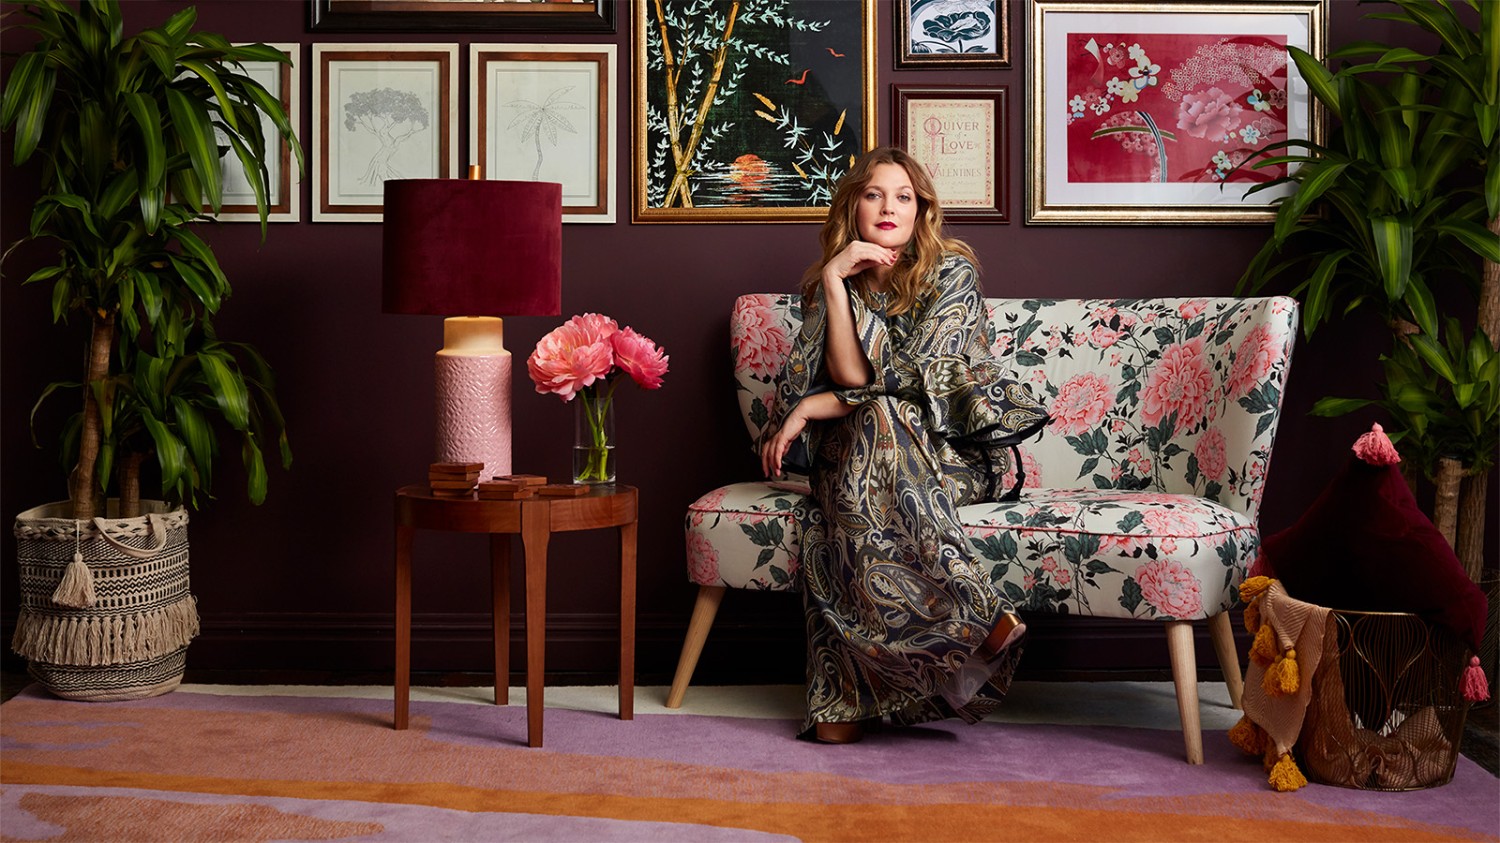 https://corporate.walmart.com/content/corporate/en_us/news/2019/03/28/a-home-in-bloom-drew-barrymore-and-walmart-launch-exclusive-online-collection-drew-barrymore-flower-home/jcr:content/newsimage.img.jpg/1702401224461.jpg